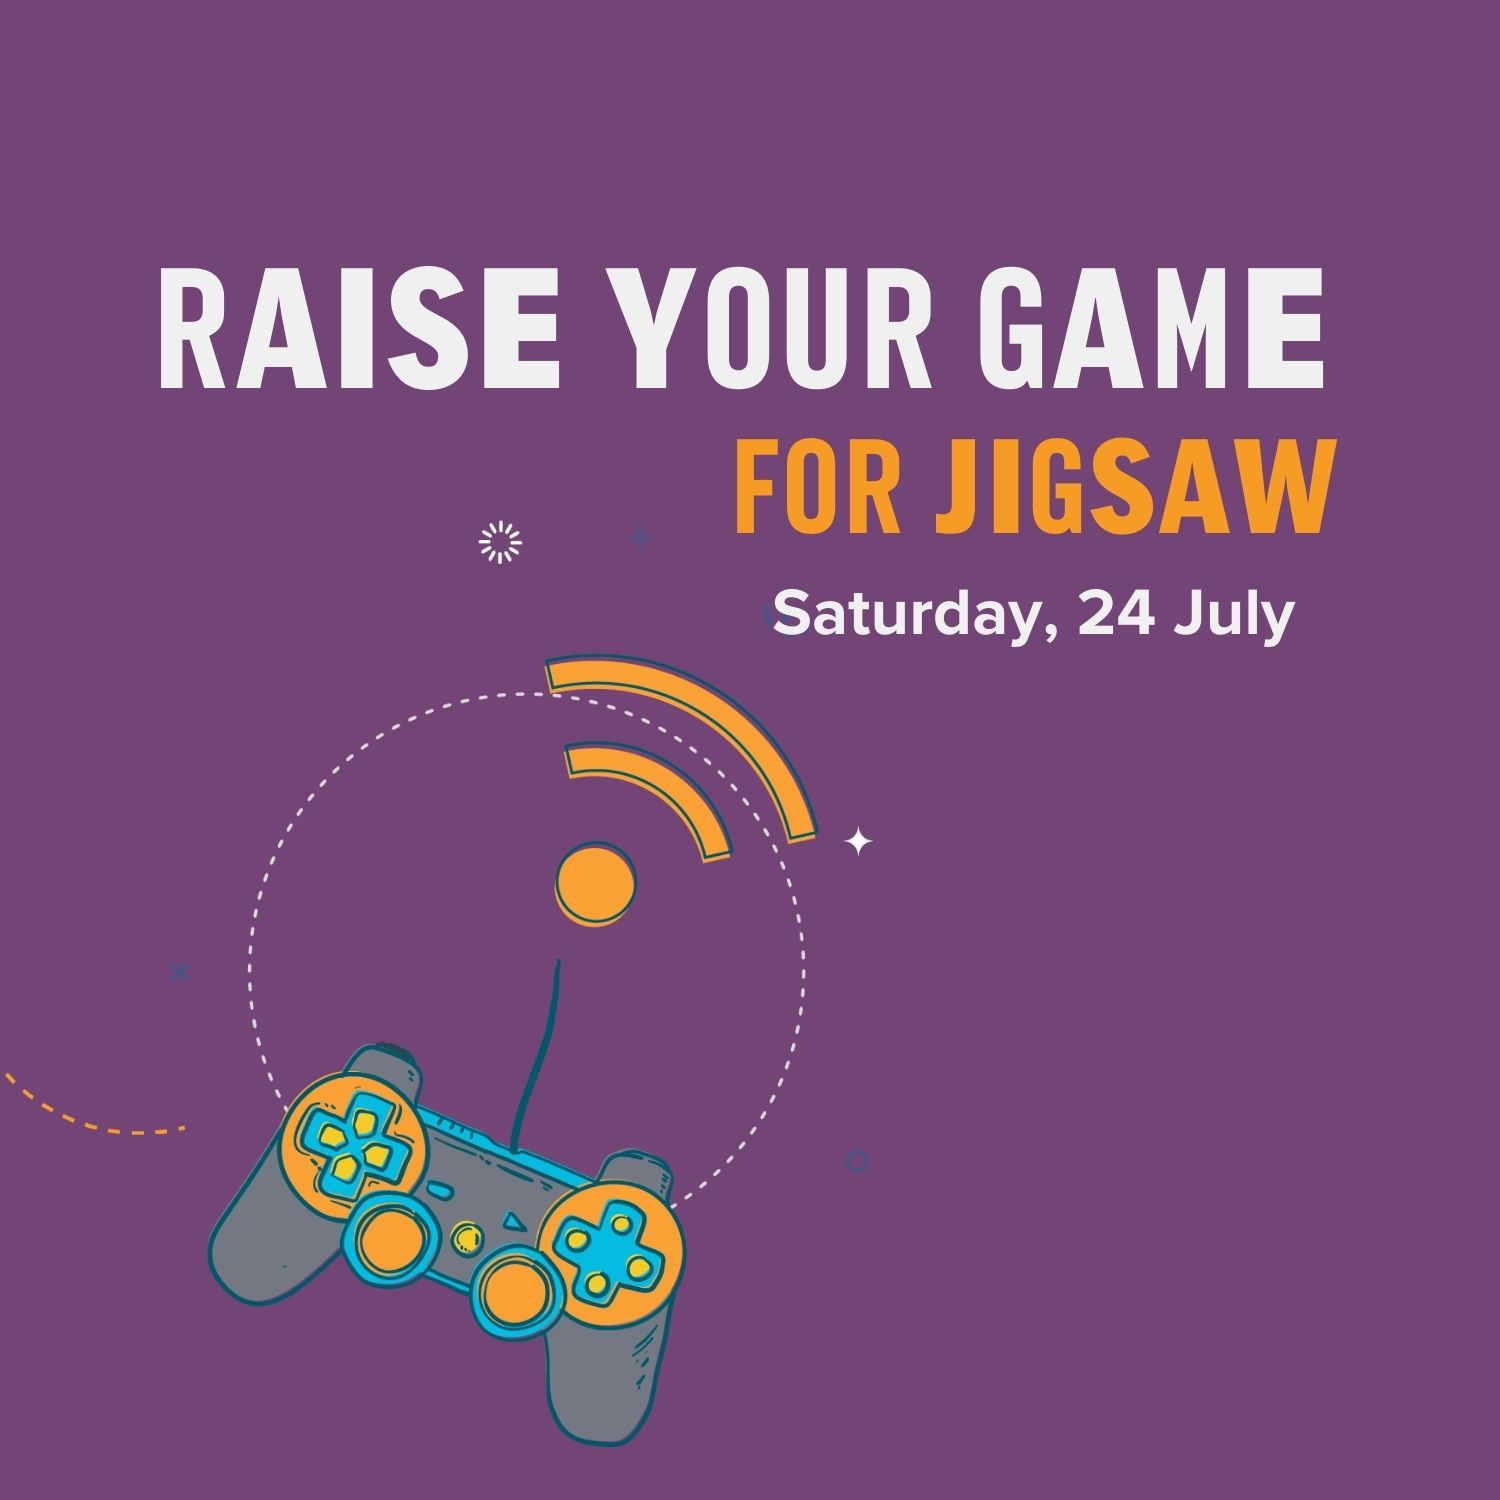 raise your game for jigsaw logo with game controller